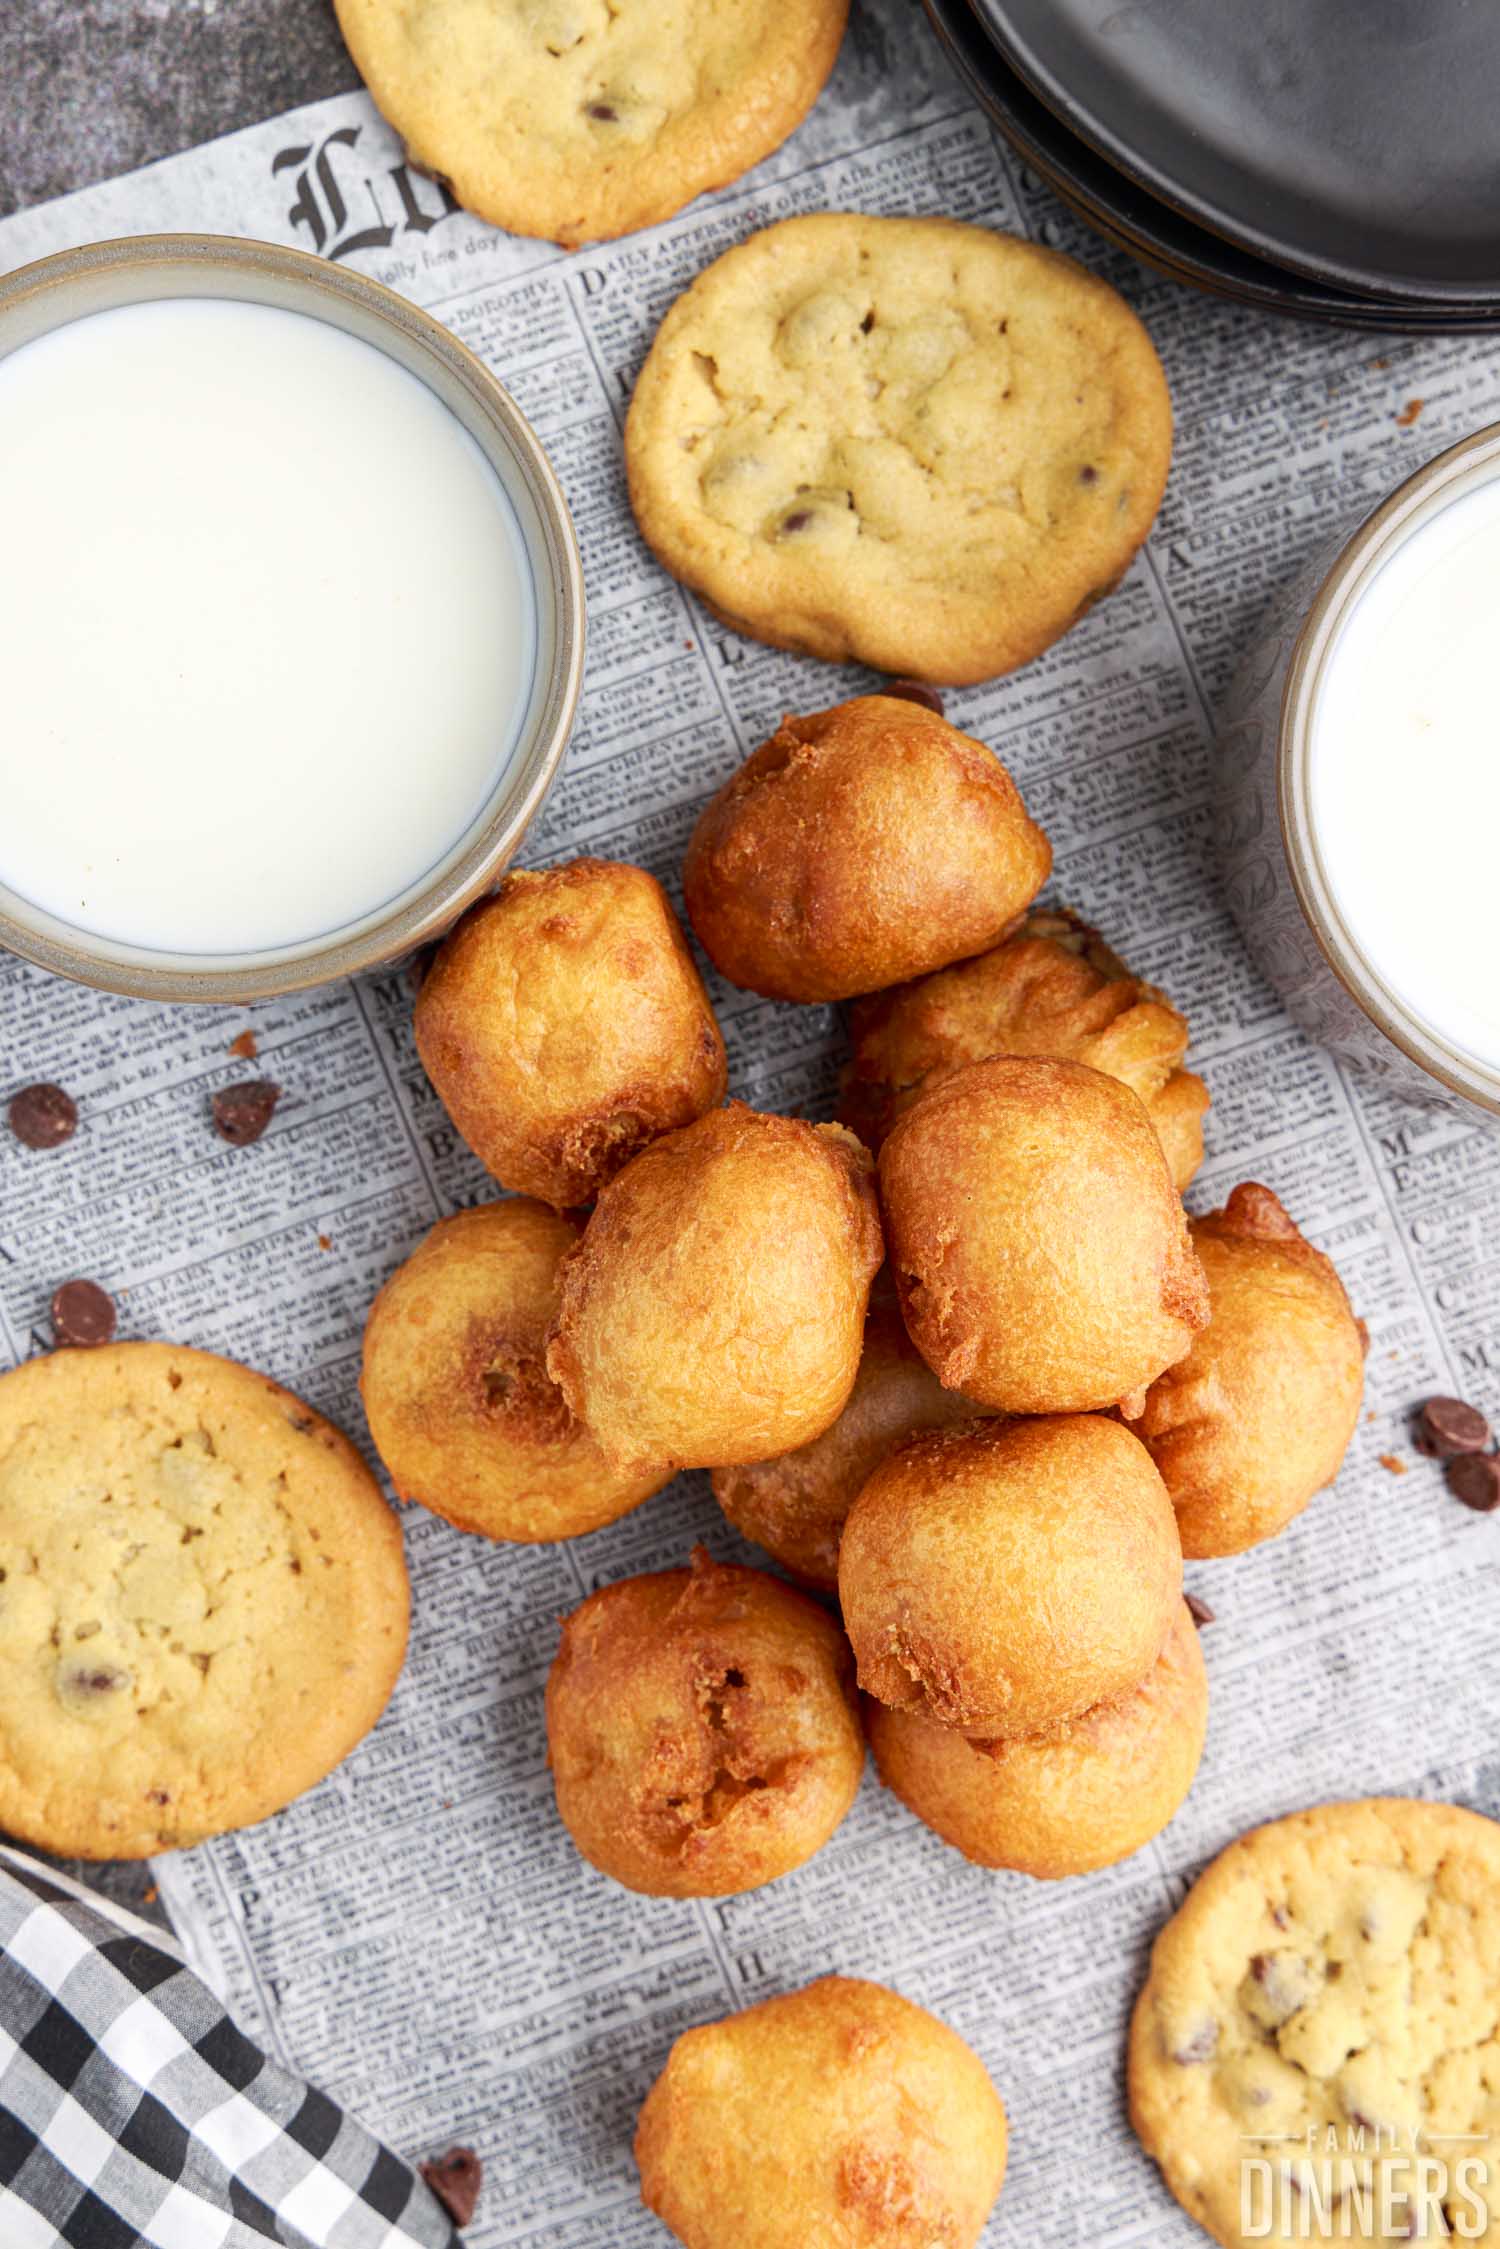 pile of deep fried cookie dough bites on a paper, with baked cookies and cups of milk